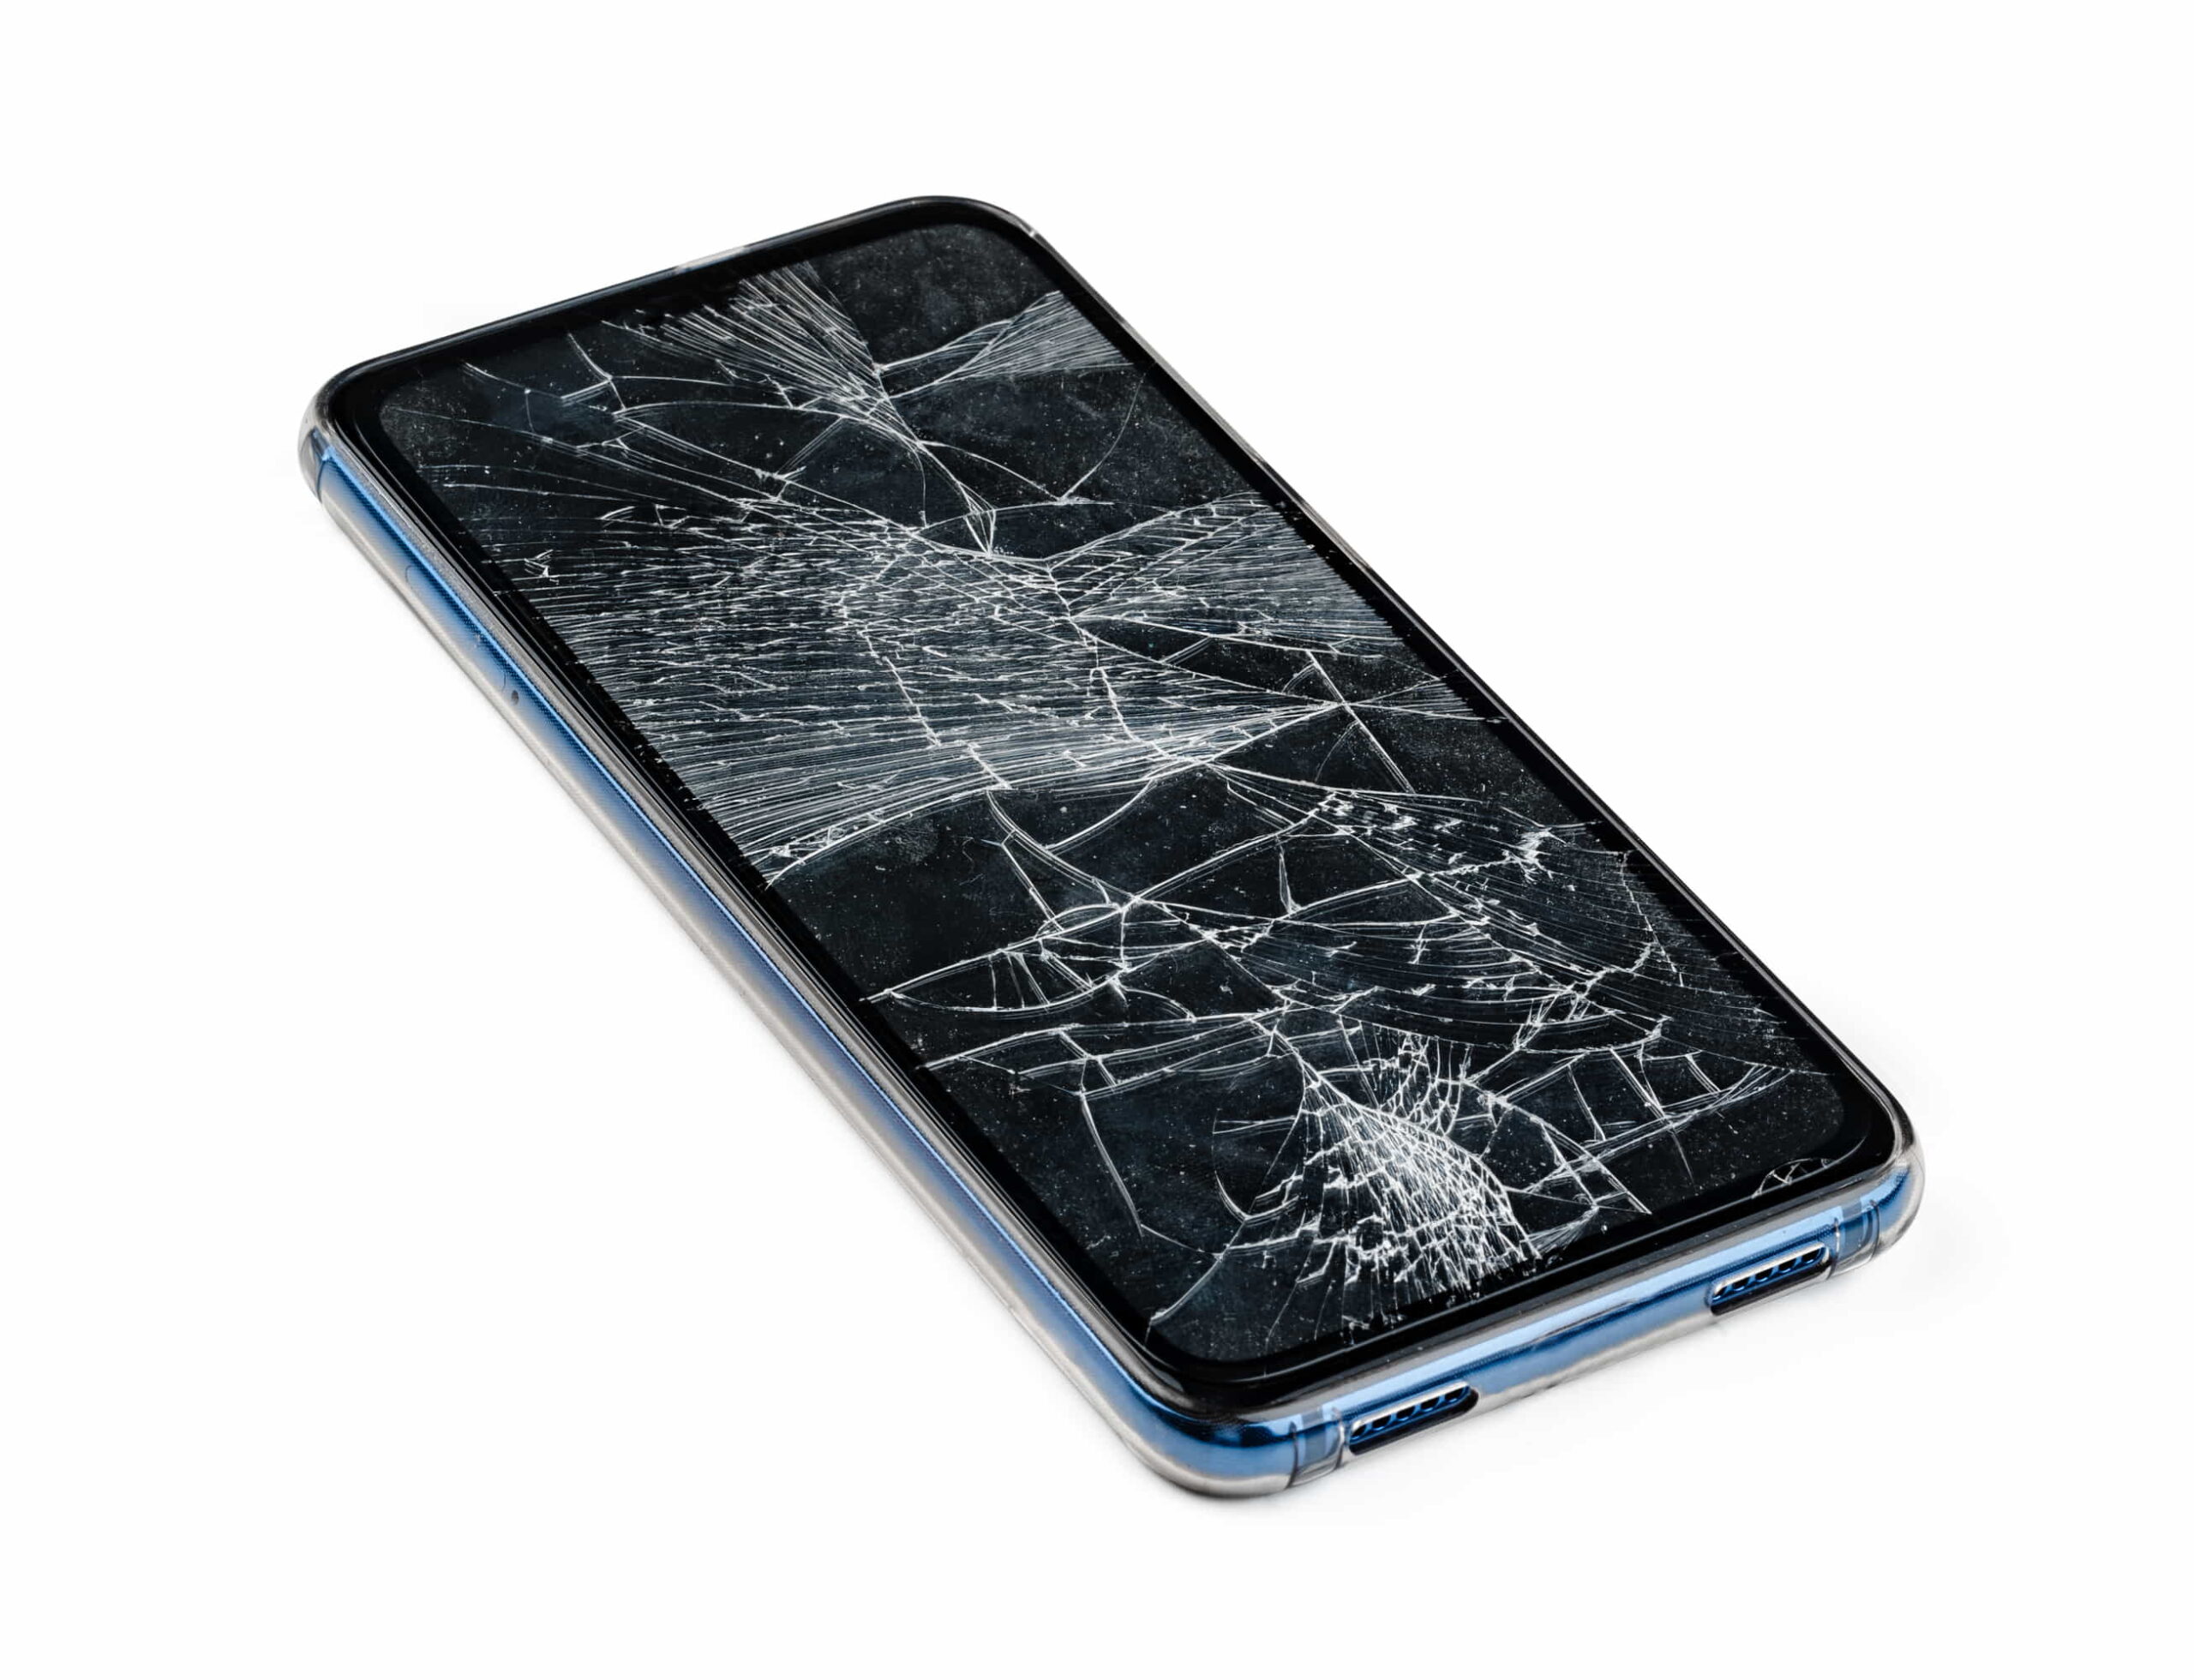 A smartphone with a cracked screen on a white background.